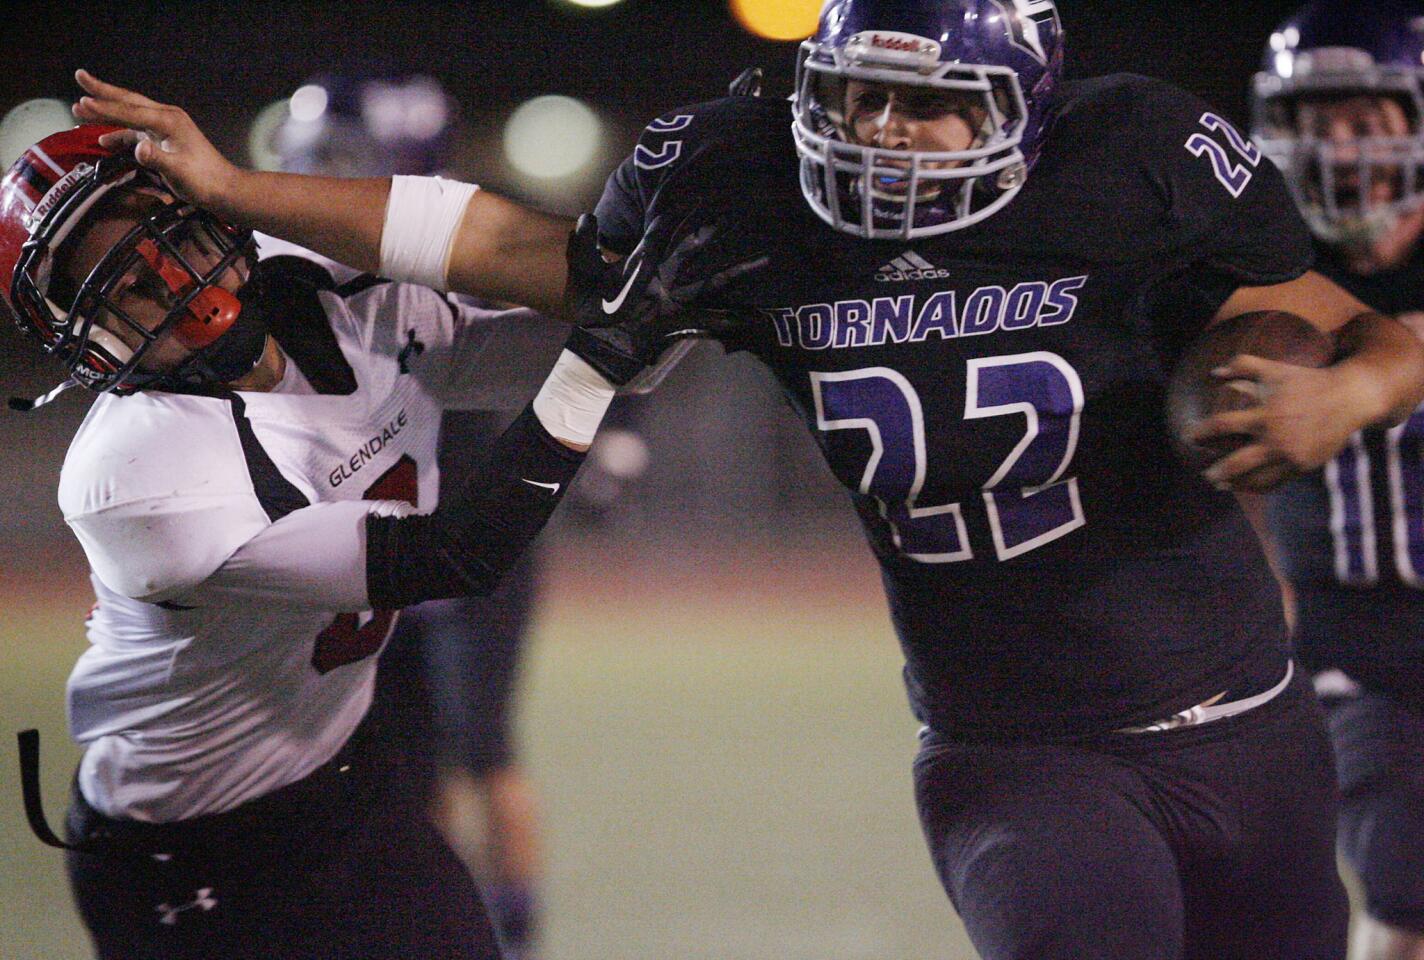 Glendale's Martin Marin, left, tries to tackle Hoover's Jesse Pina during a game at Glendale High School on Friday, November 2, 2012.